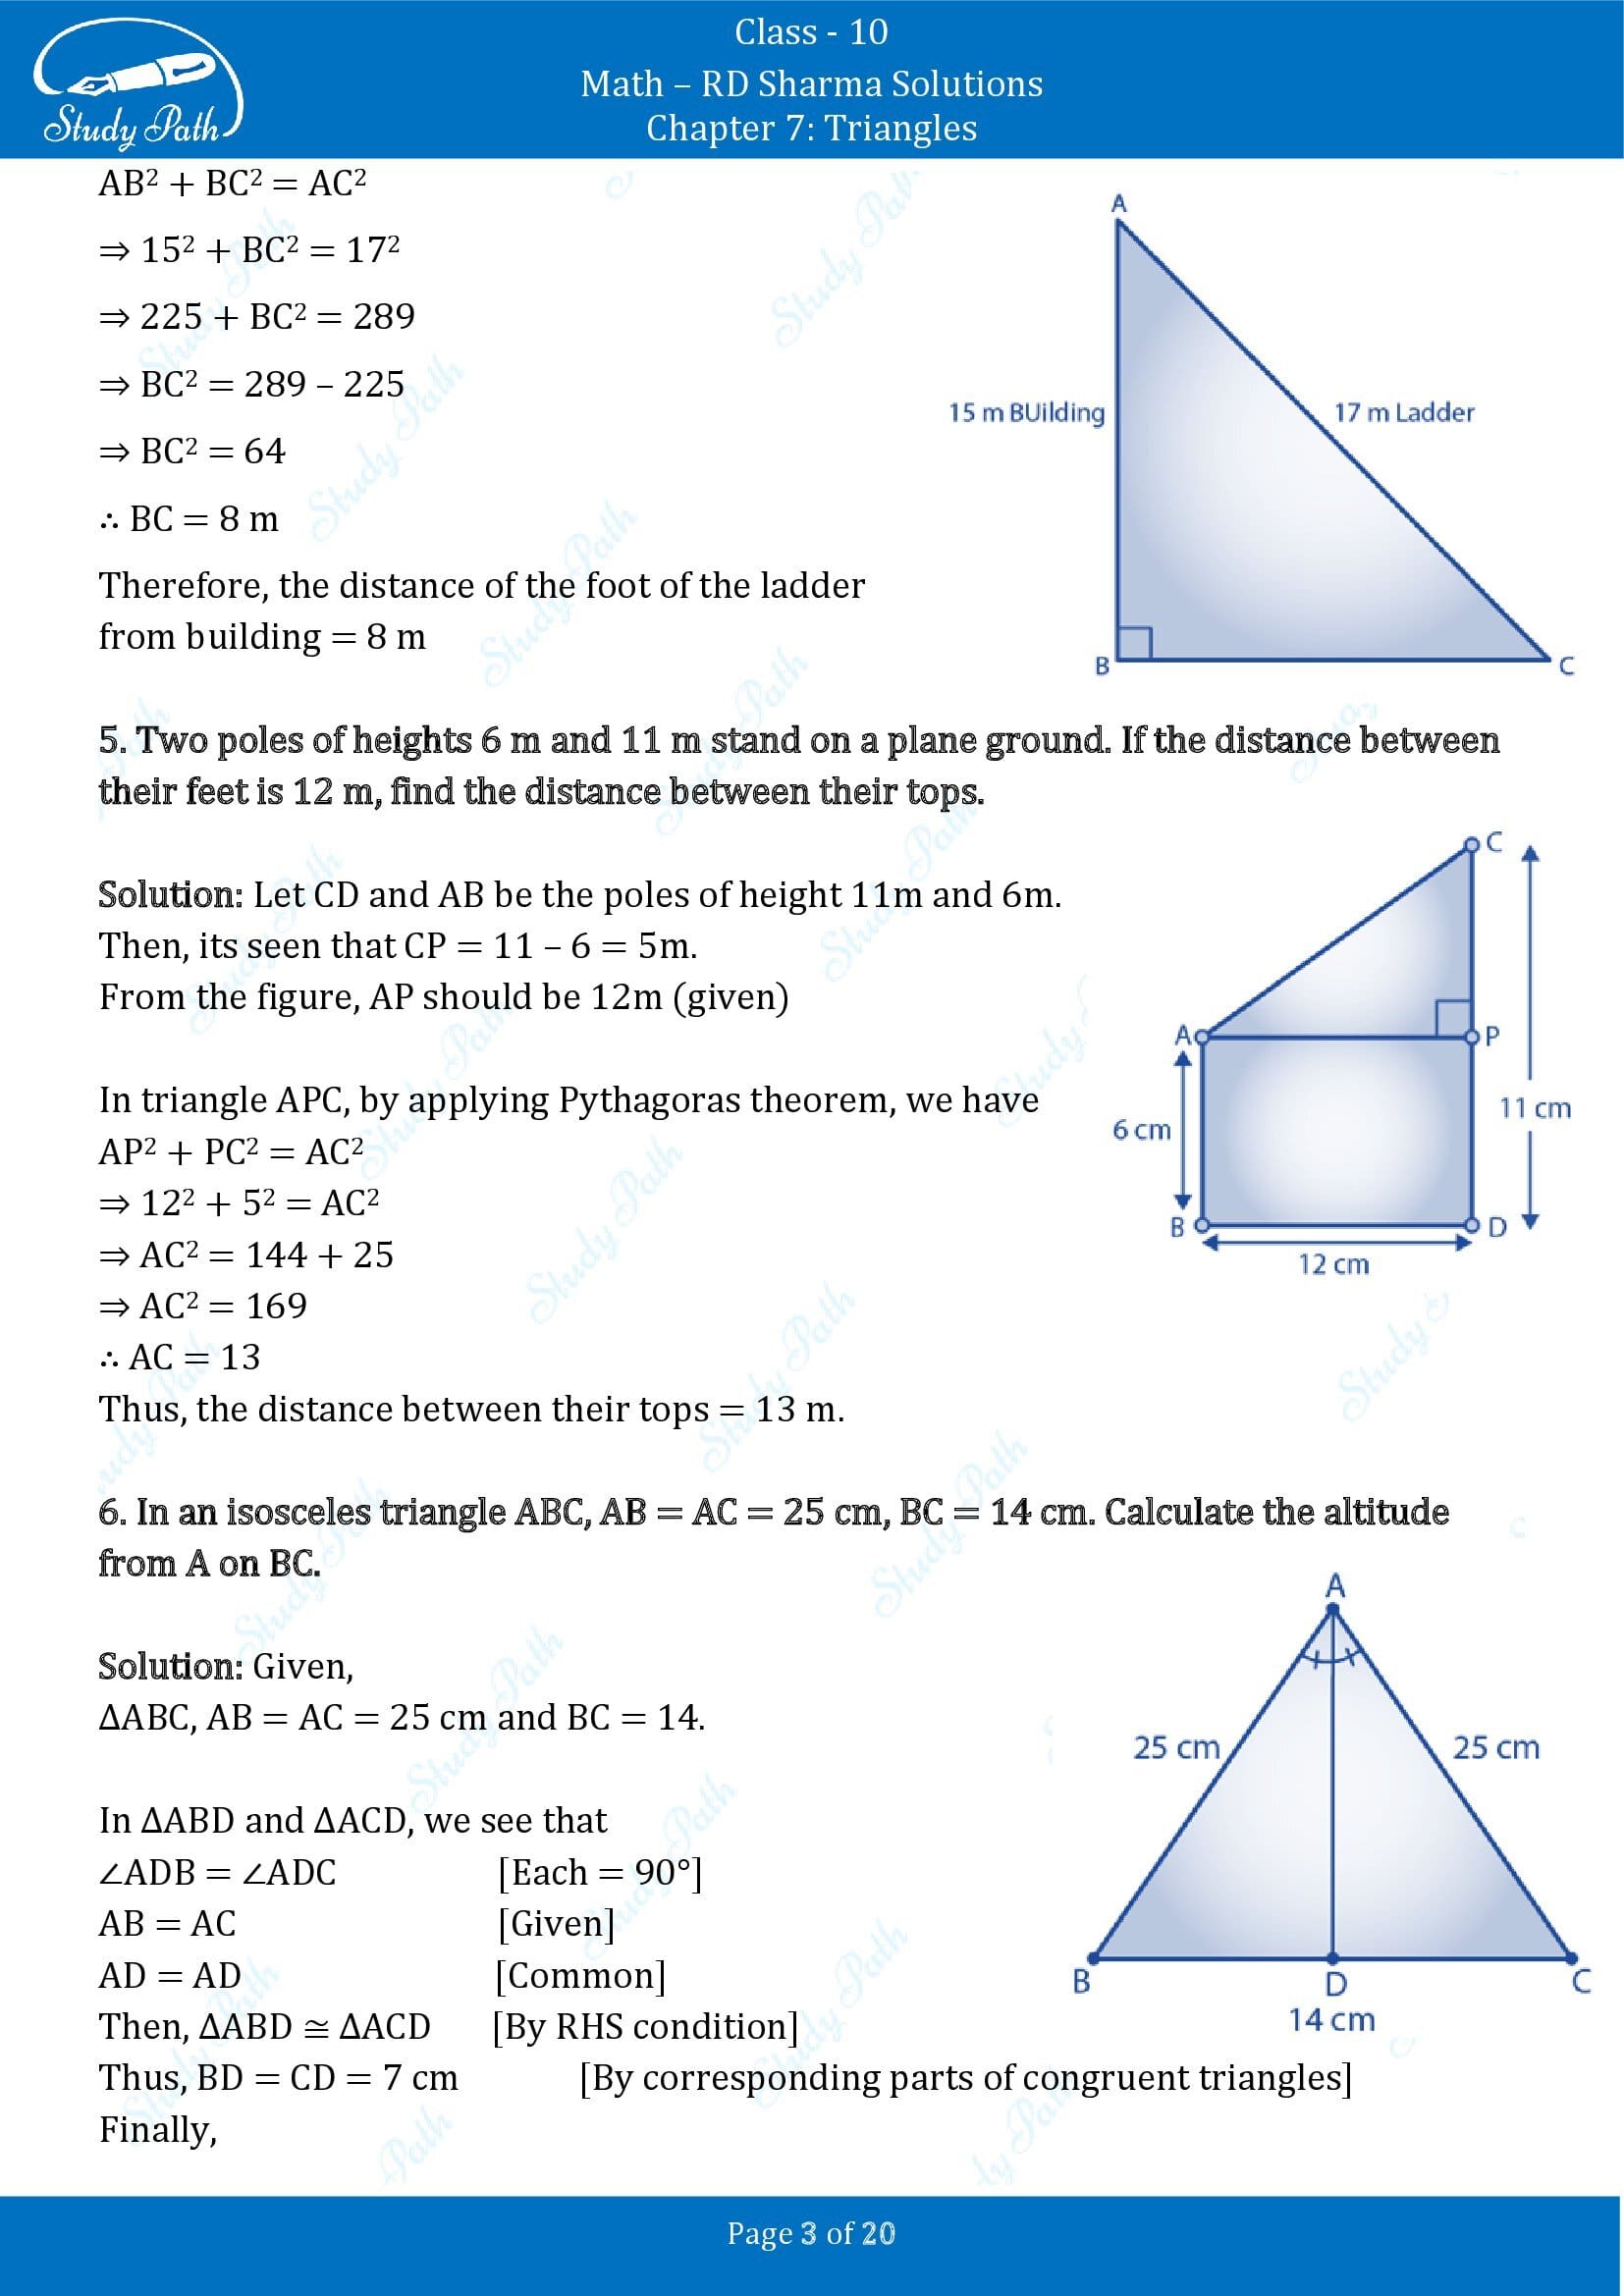 RD Sharma Solutions Class 10 Chapter 7 Triangles Exercise 7.7 00003